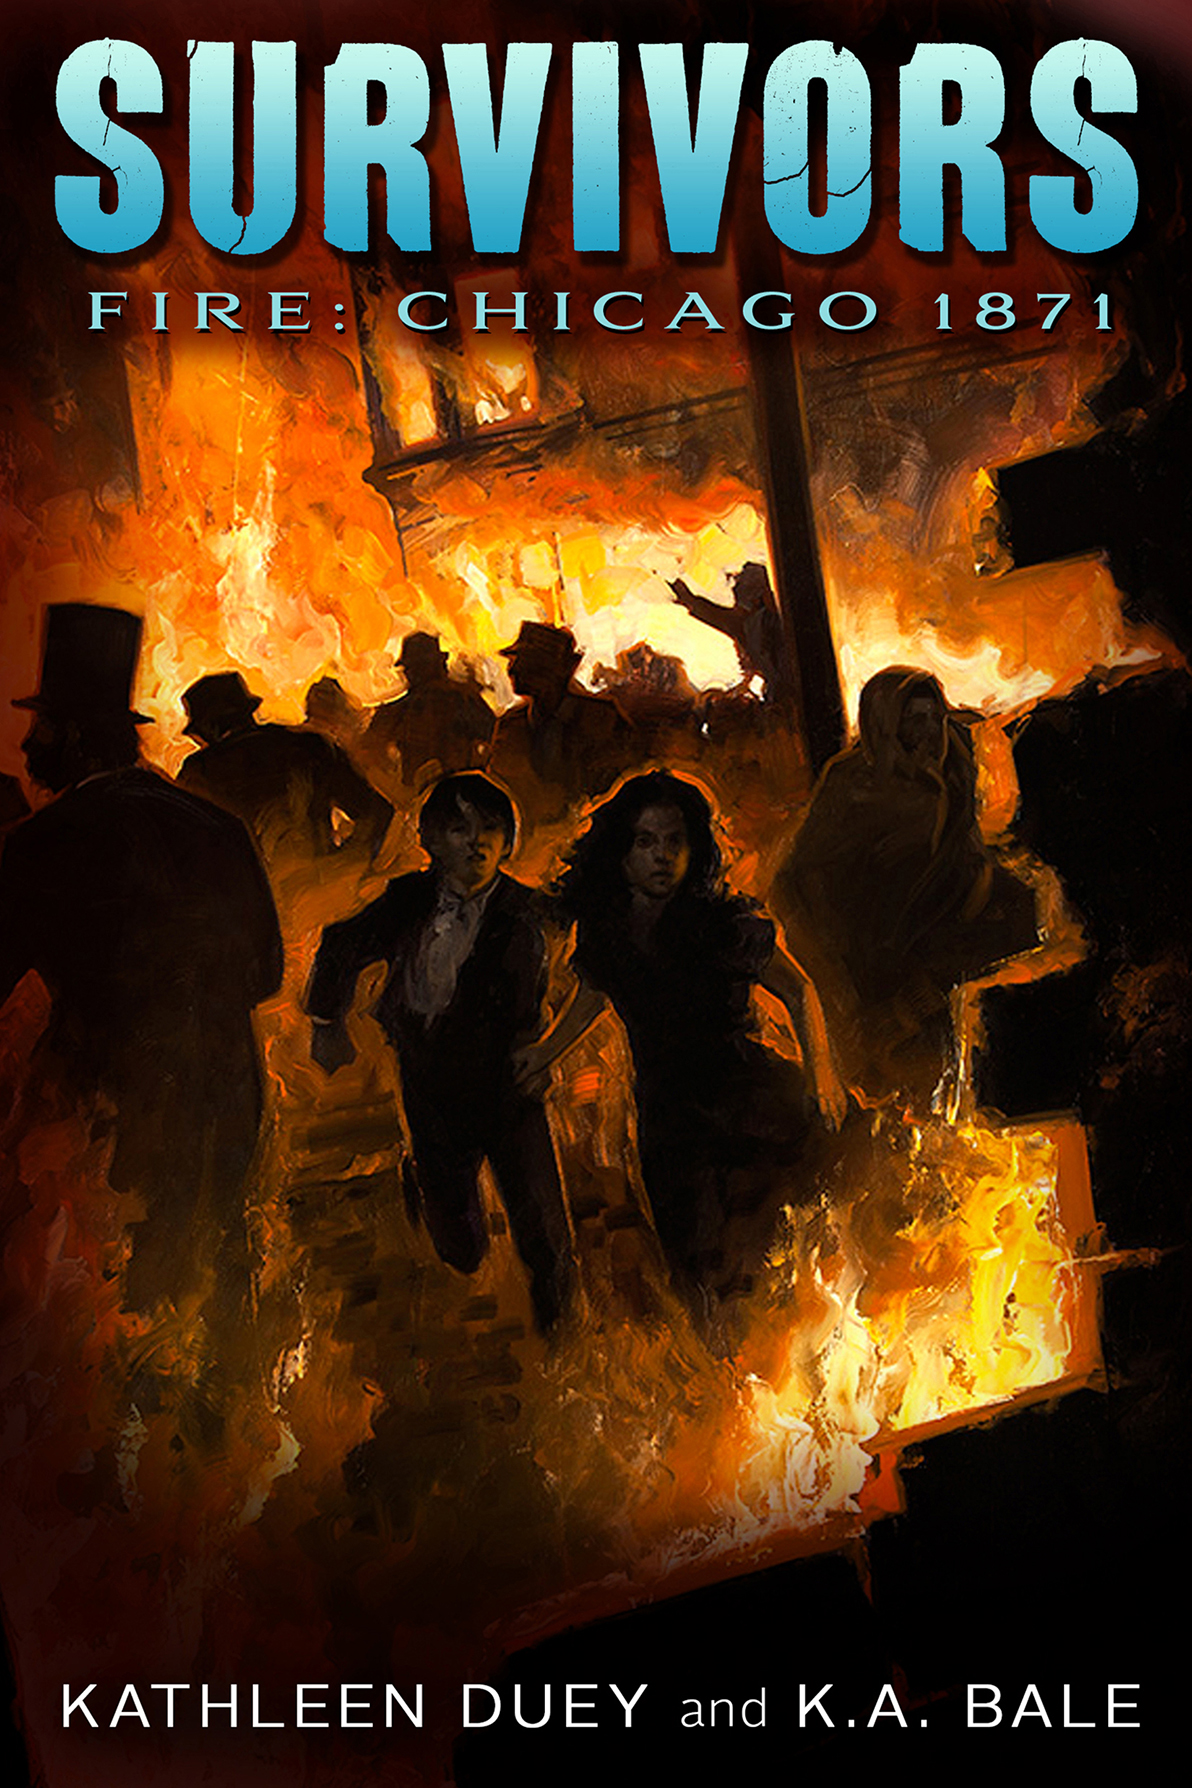 Fire: Chicago 1871 by Kathleen Duey